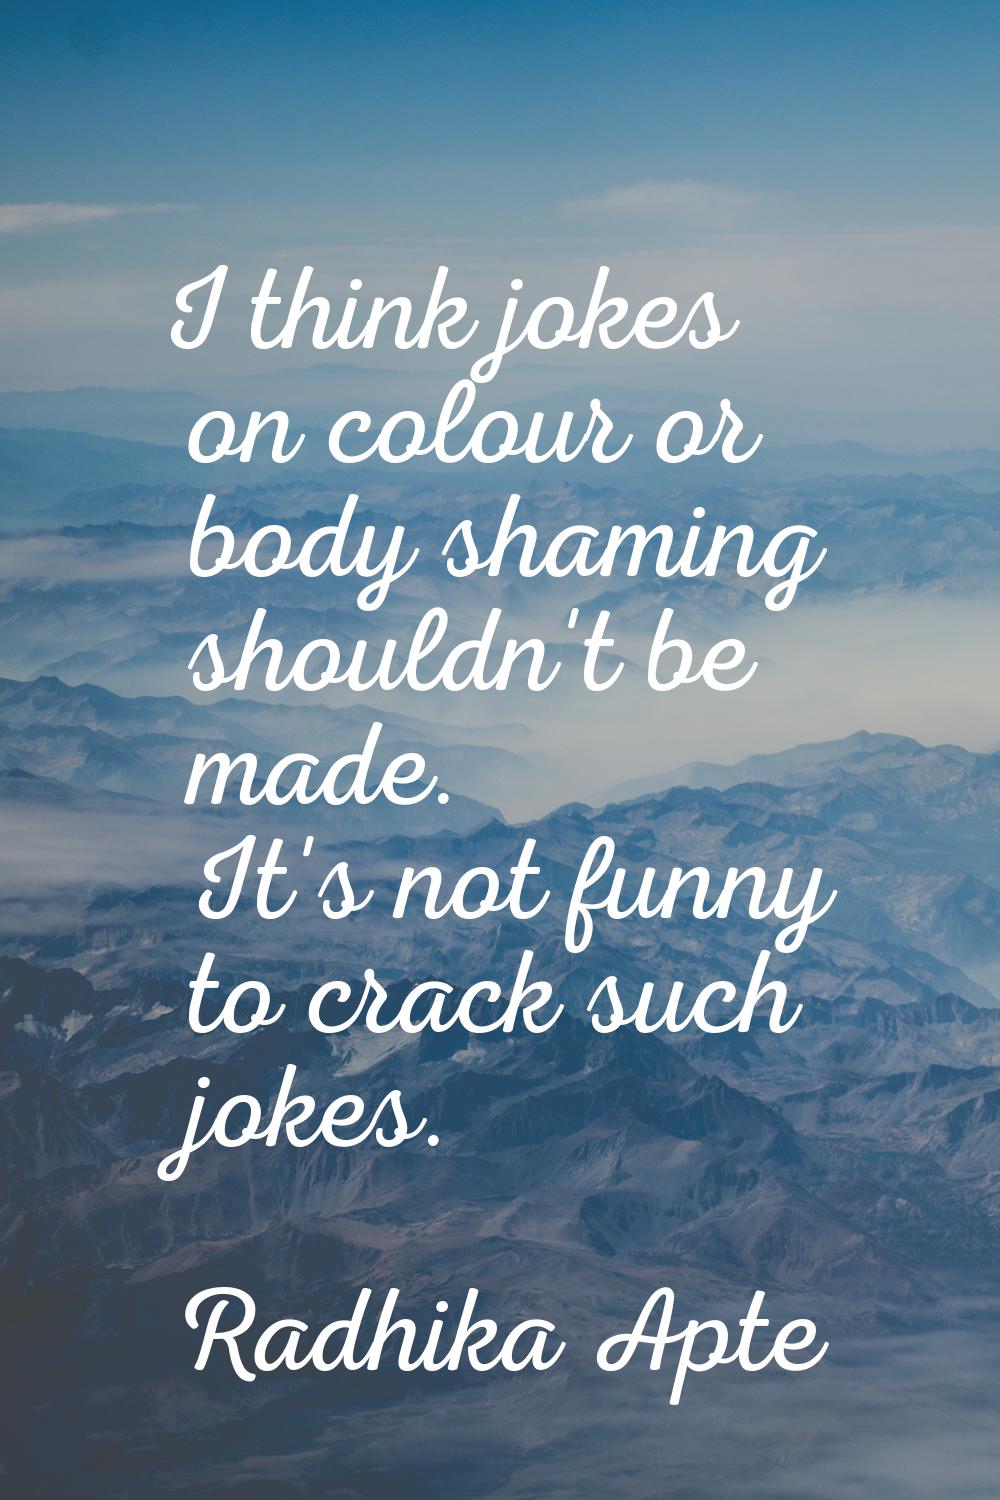 I think jokes on colour or body shaming shouldn't be made. It's not funny to crack such jokes.